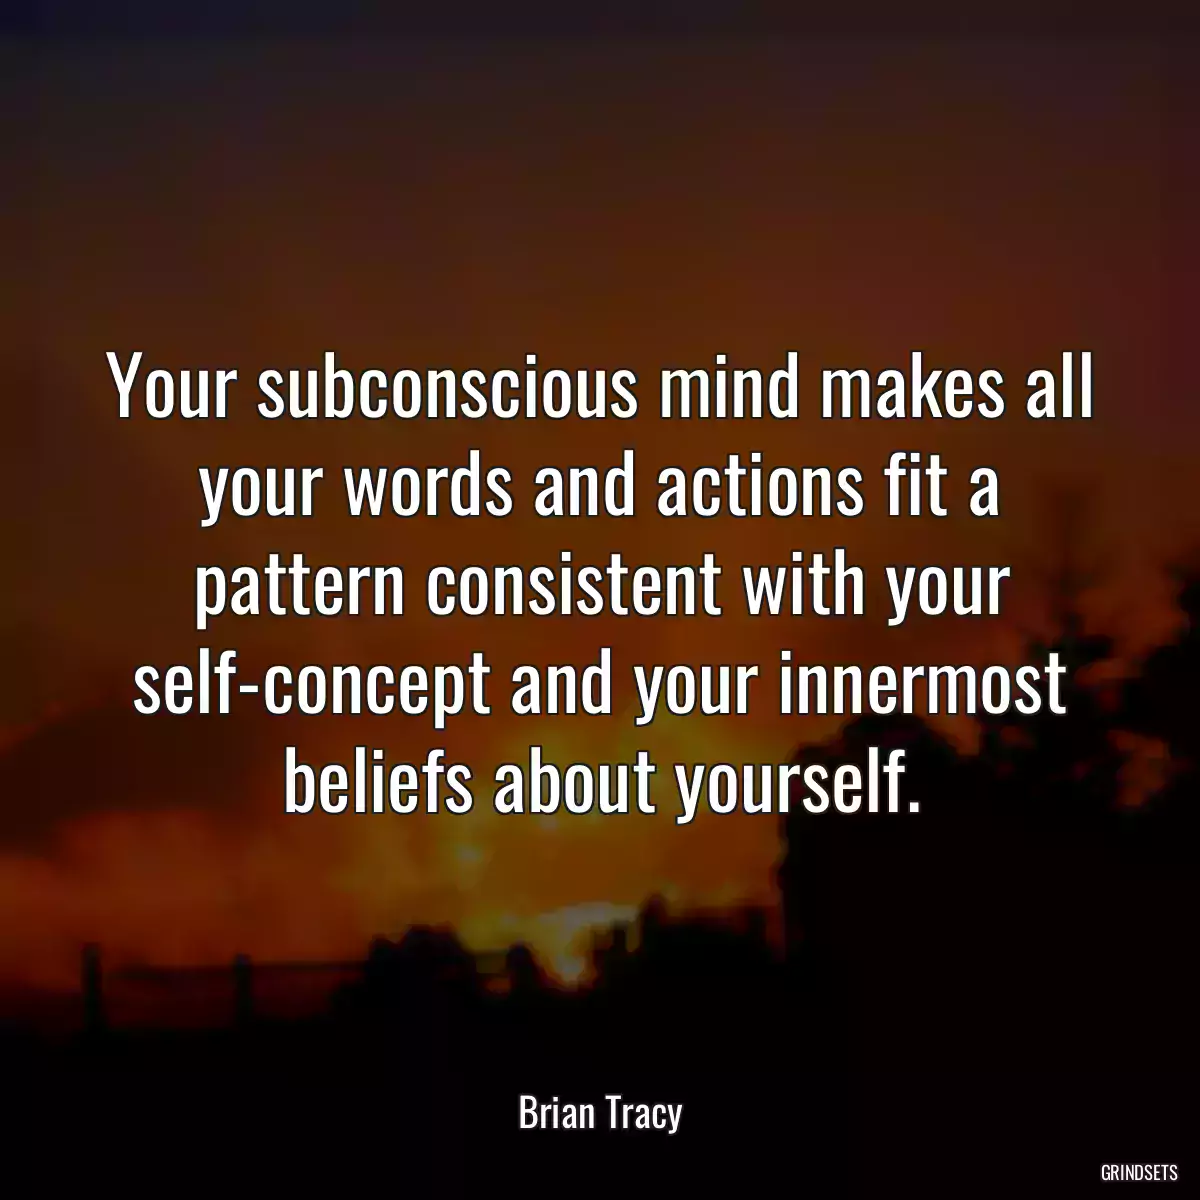 Your subconscious mind makes all your words and actions fit a pattern consistent with your self-concept and your innermost beliefs about yourself.